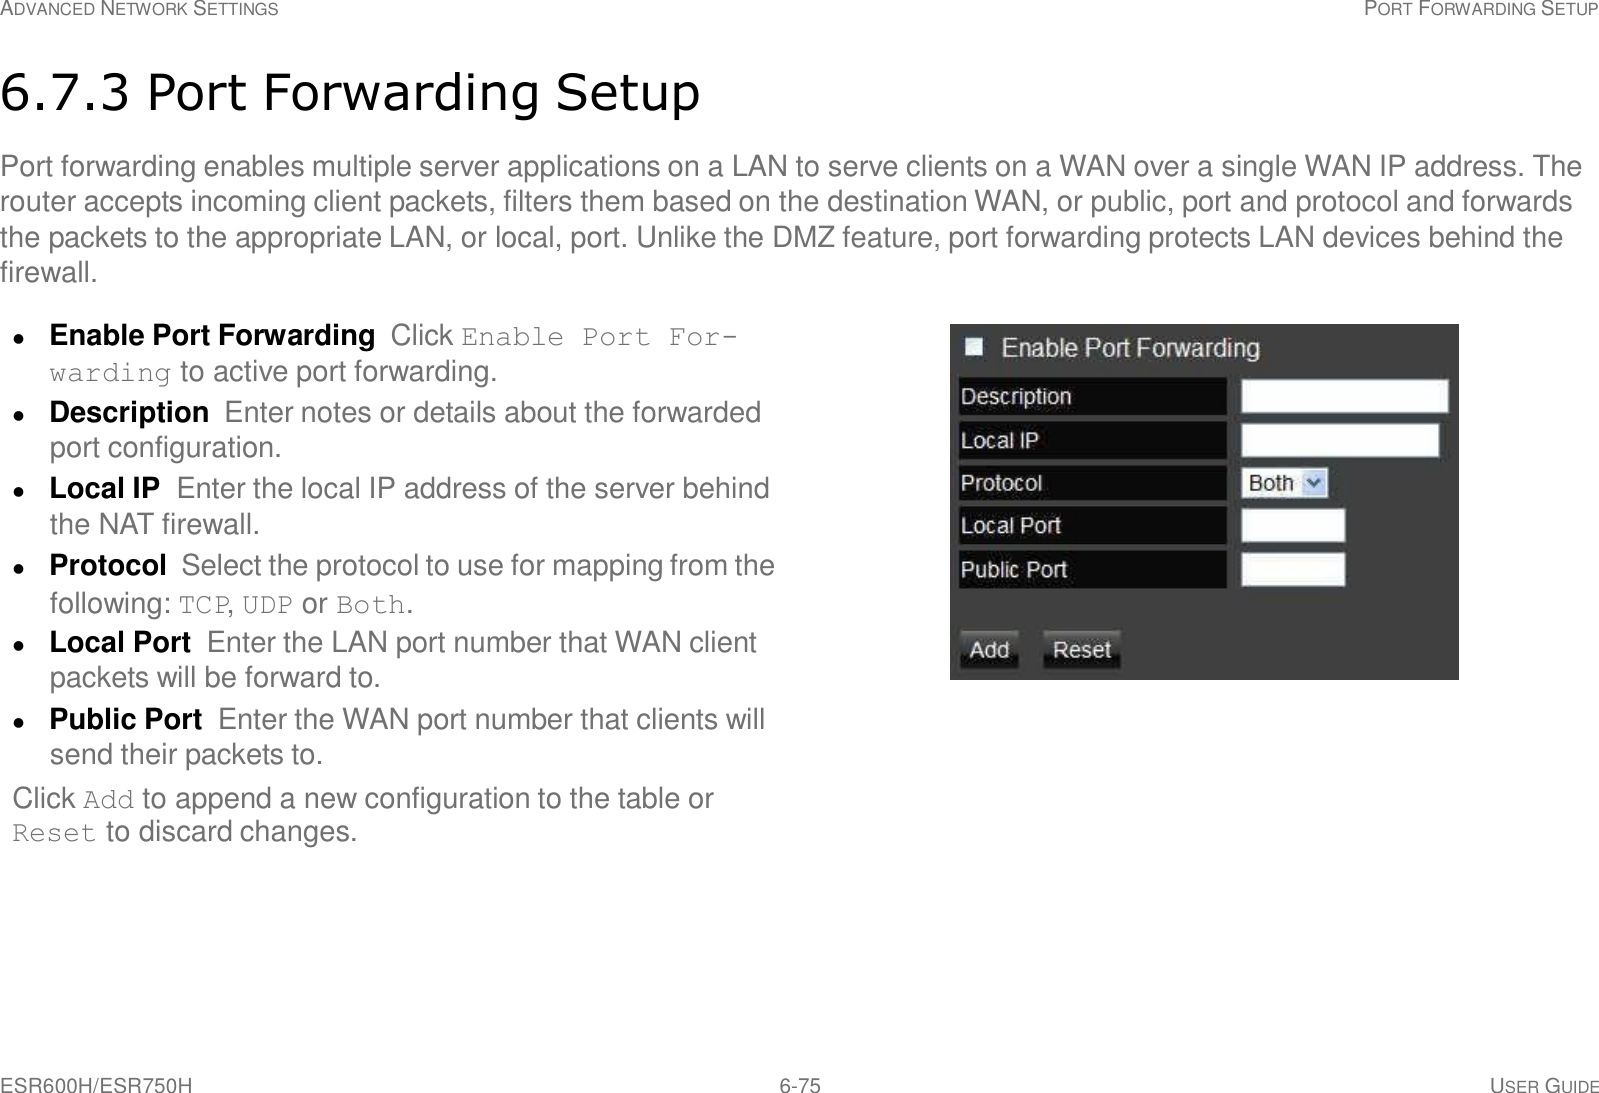 ESR600H/ESR750H 6-75 USER GUIDE ADVANCED NETWORK SETTINGS PORT FORWARDING SETUP     6.7.3 Port Forwarding Setup  Port forwarding enables multiple server applications on a LAN to serve clients on a WAN over a single WAN IP address. The router accepts incoming client packets, filters them based on the destination WAN, or public, port and protocol and forwards the packets to the appropriate LAN, or local, port. Unlike the DMZ feature, port forwarding protects LAN devices behind the firewall.   Enable Port Forwarding  Click Enable Port For- warding to active port forwarding.  Description  Enter notes or details about the forwarded port configuration.  Local IP  Enter the local IP address of the server behind the NAT firewall.  Protocol  Select the protocol to use for mapping from the following: TCP, UDP or Both.  Local Port  Enter the LAN port number that WAN client packets will be forward to.  Public Port  Enter the WAN port number that clients will send their packets to. Click Add to append a new configuration to the table or Reset to discard changes. 